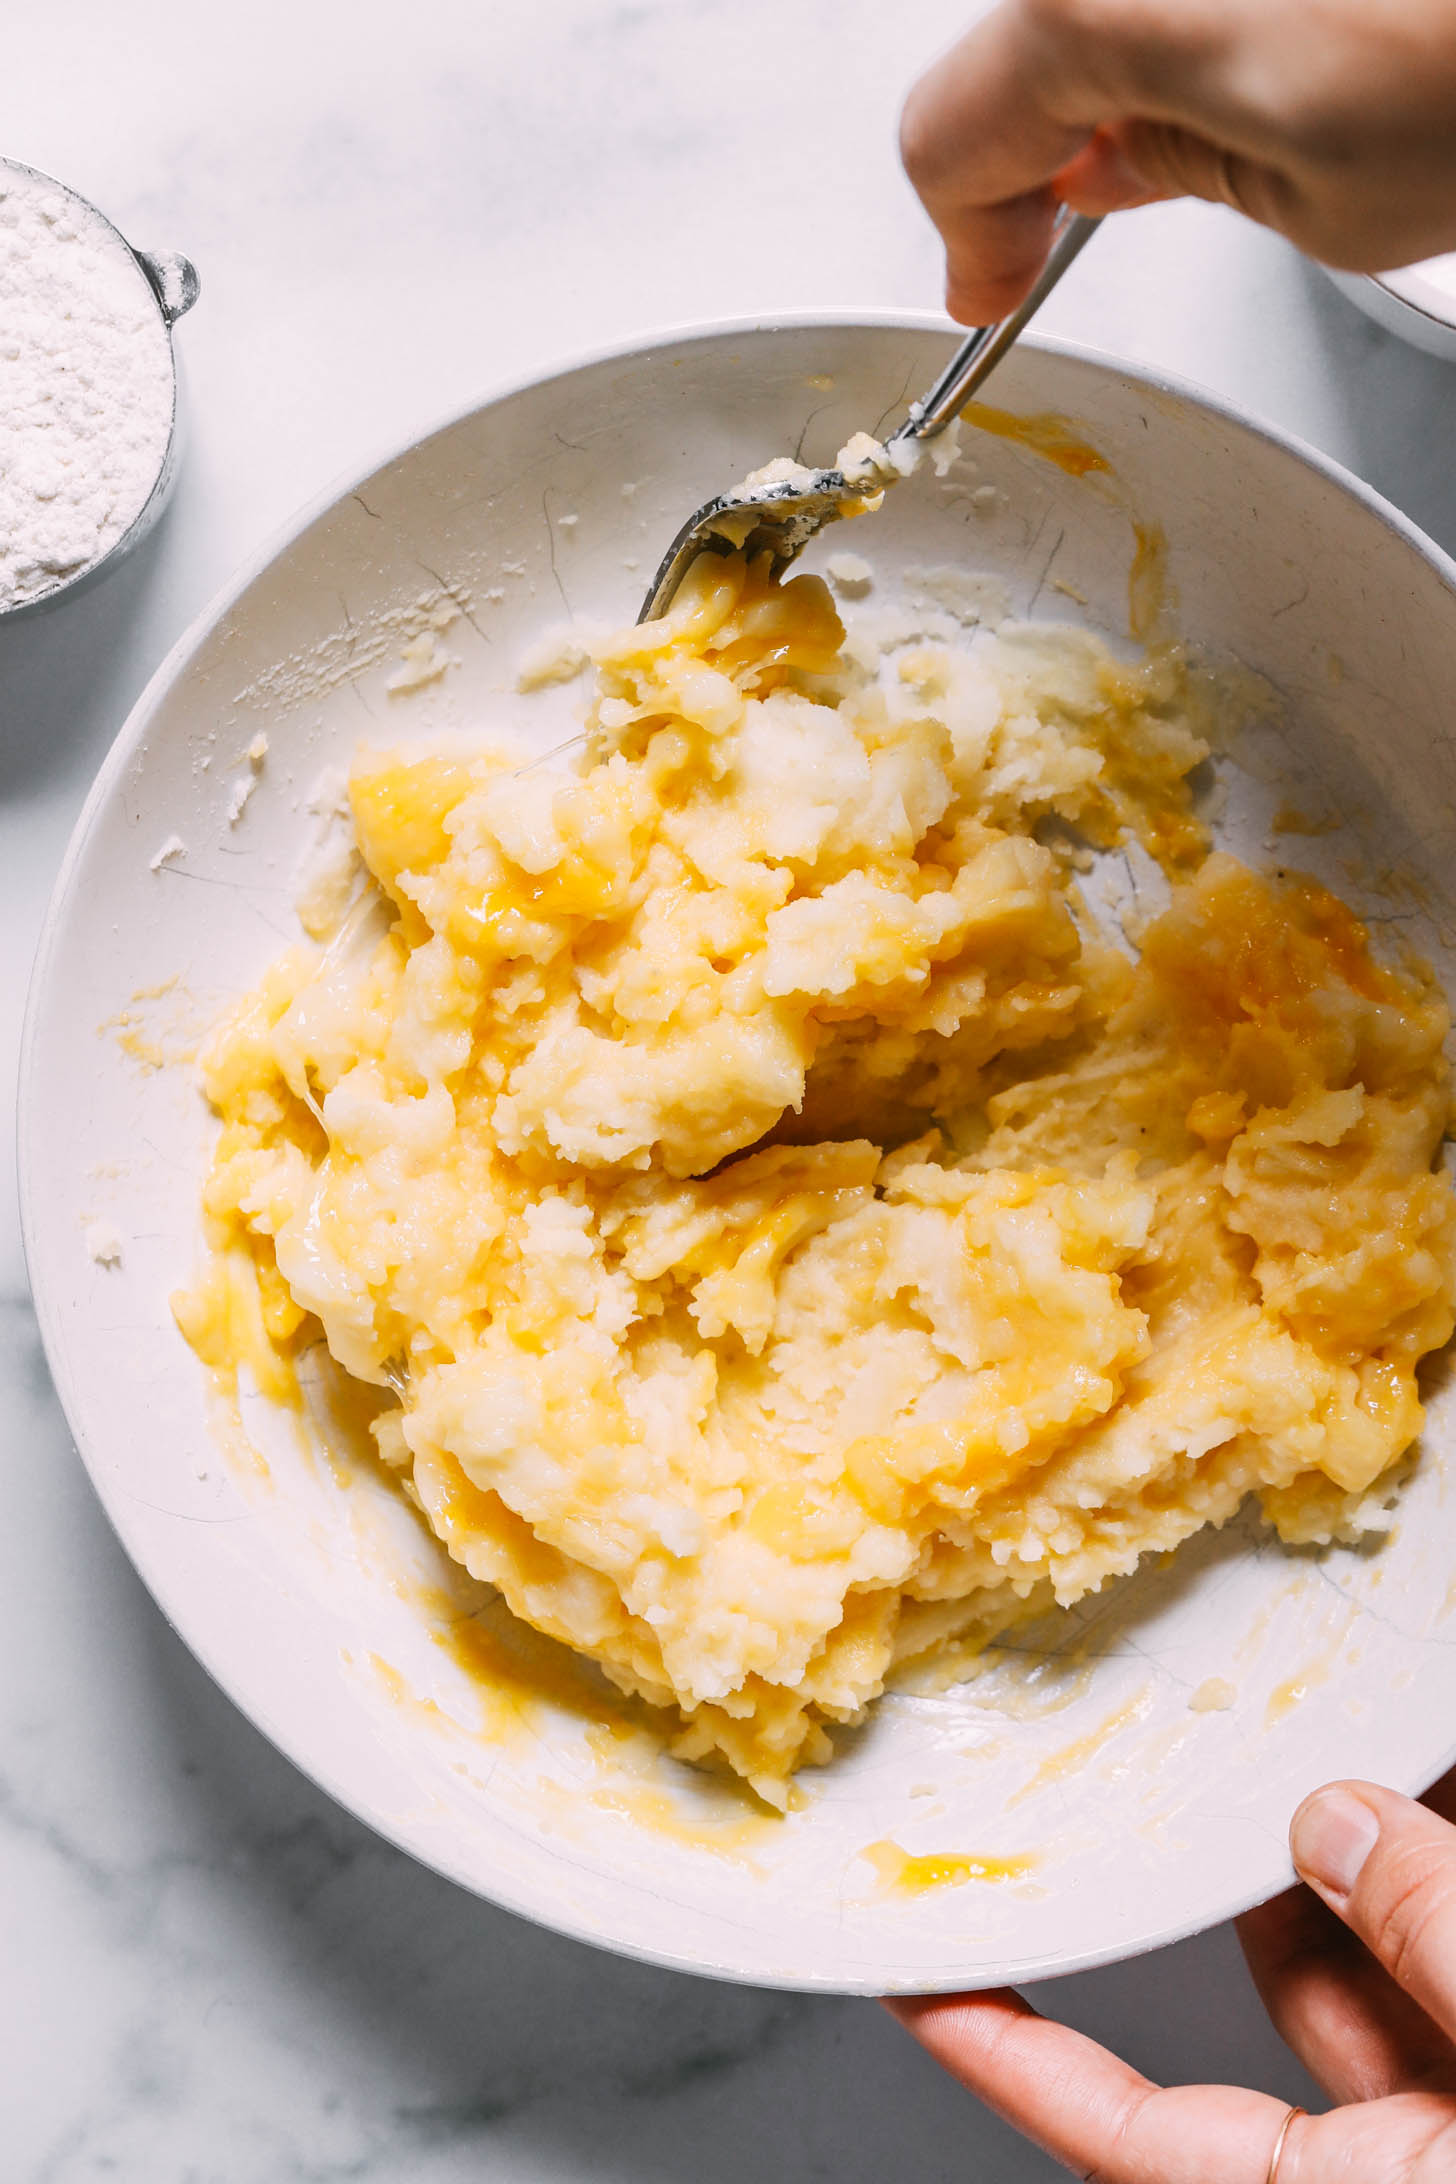 Mixing an egg into mashed potatoes 